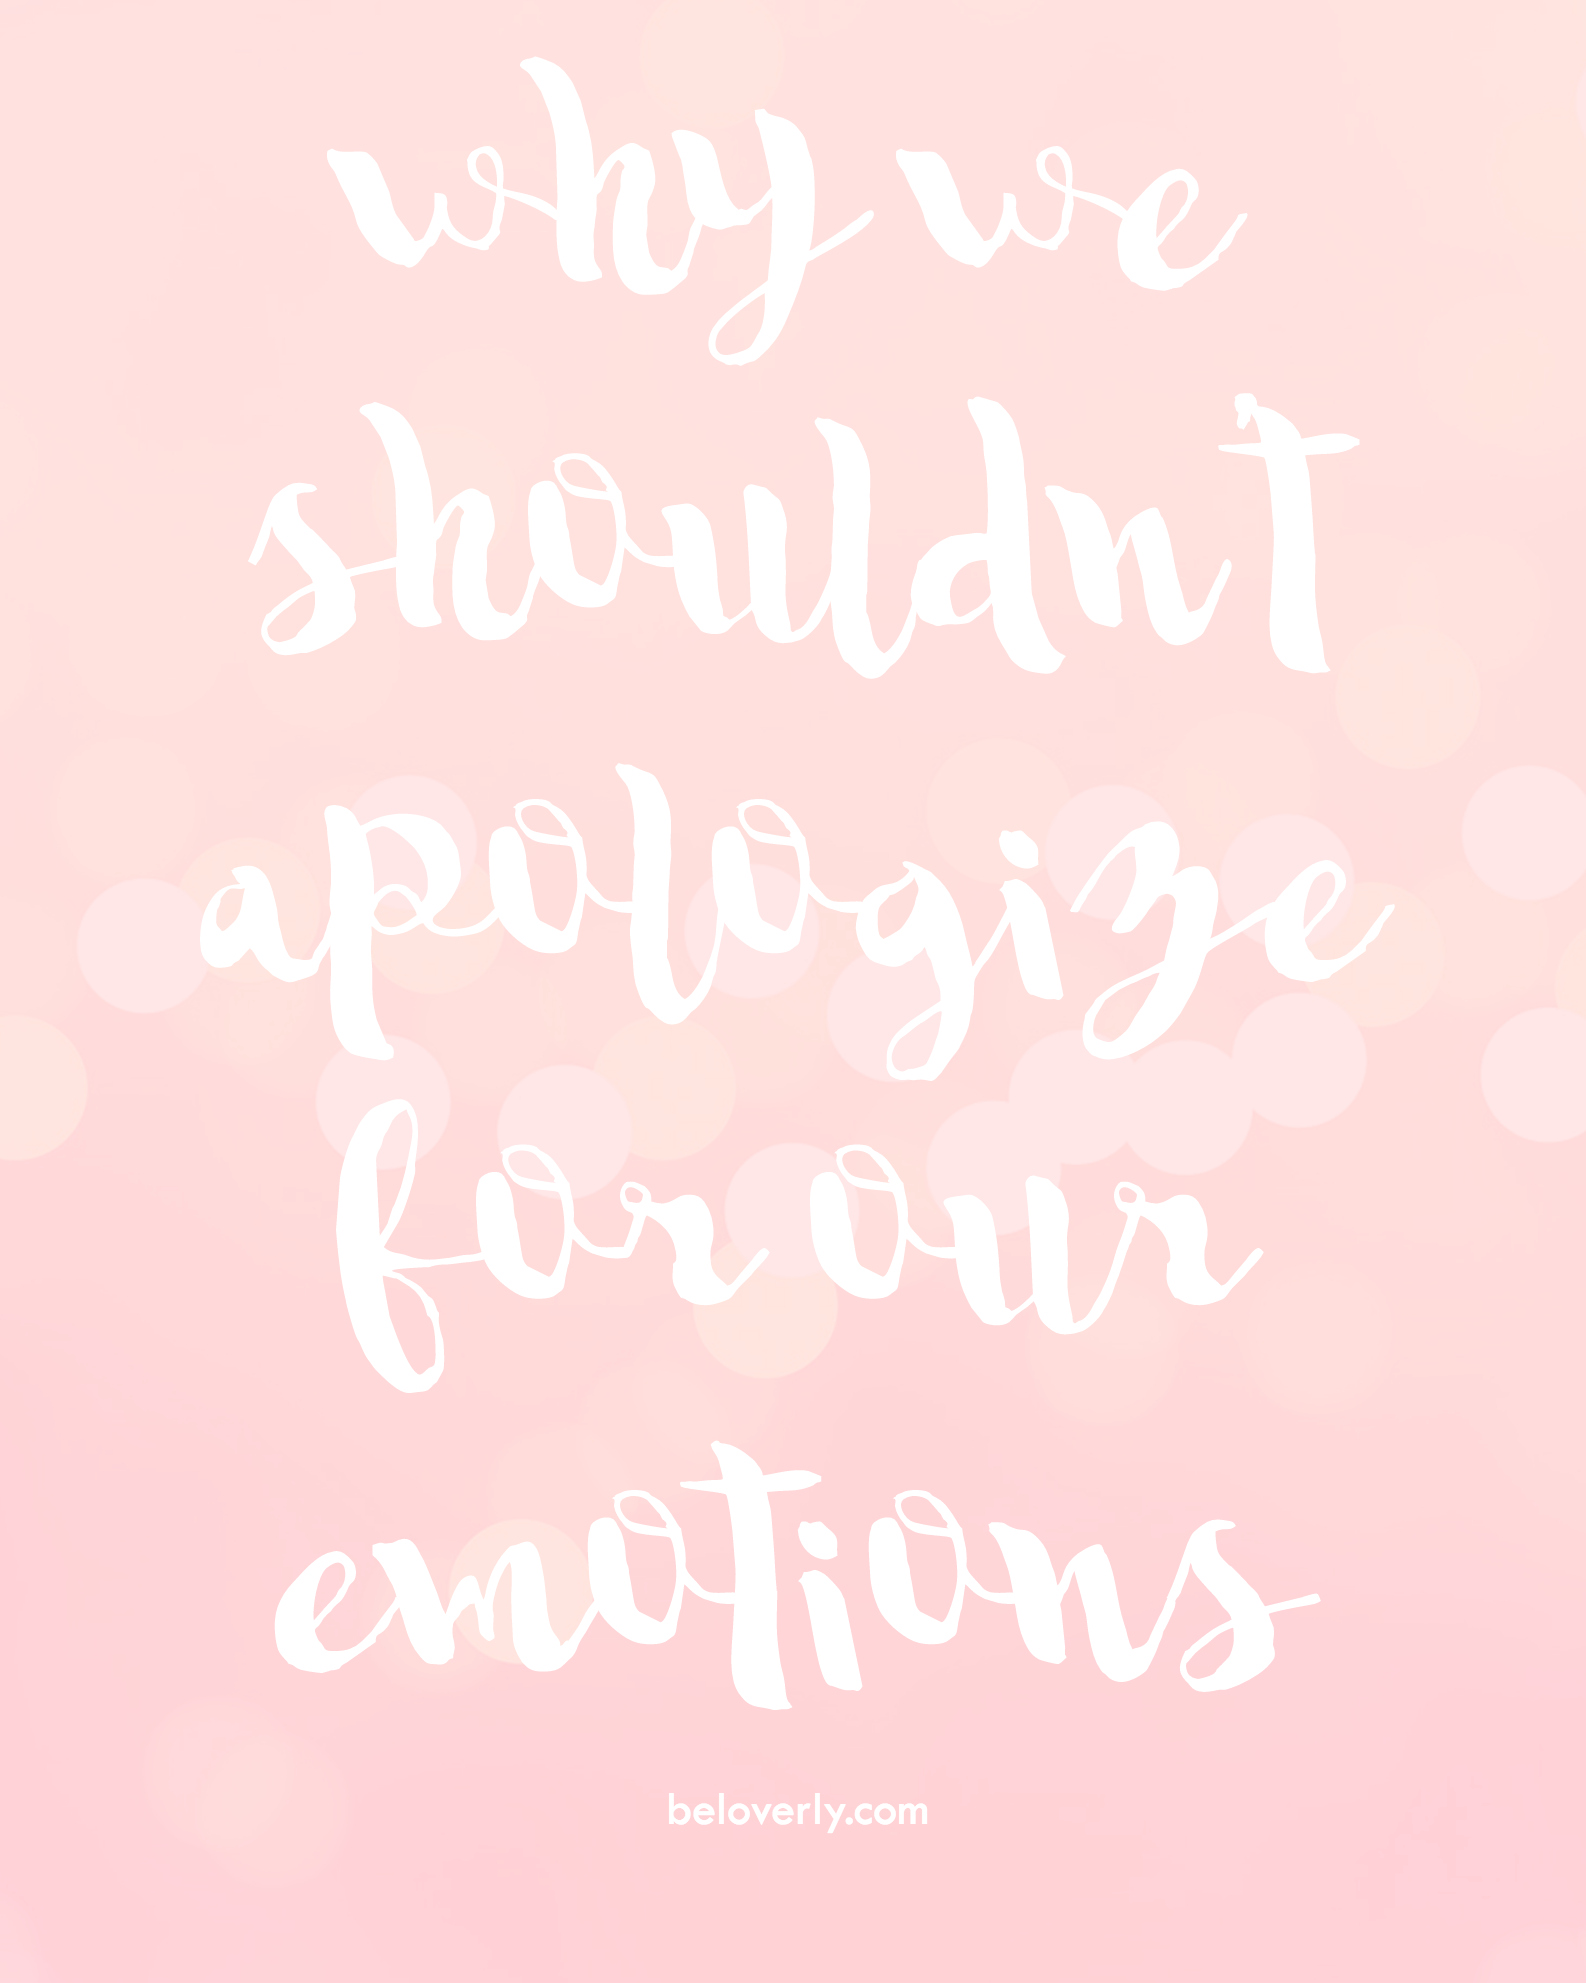 whyweshouldn'tapologizeforemotions